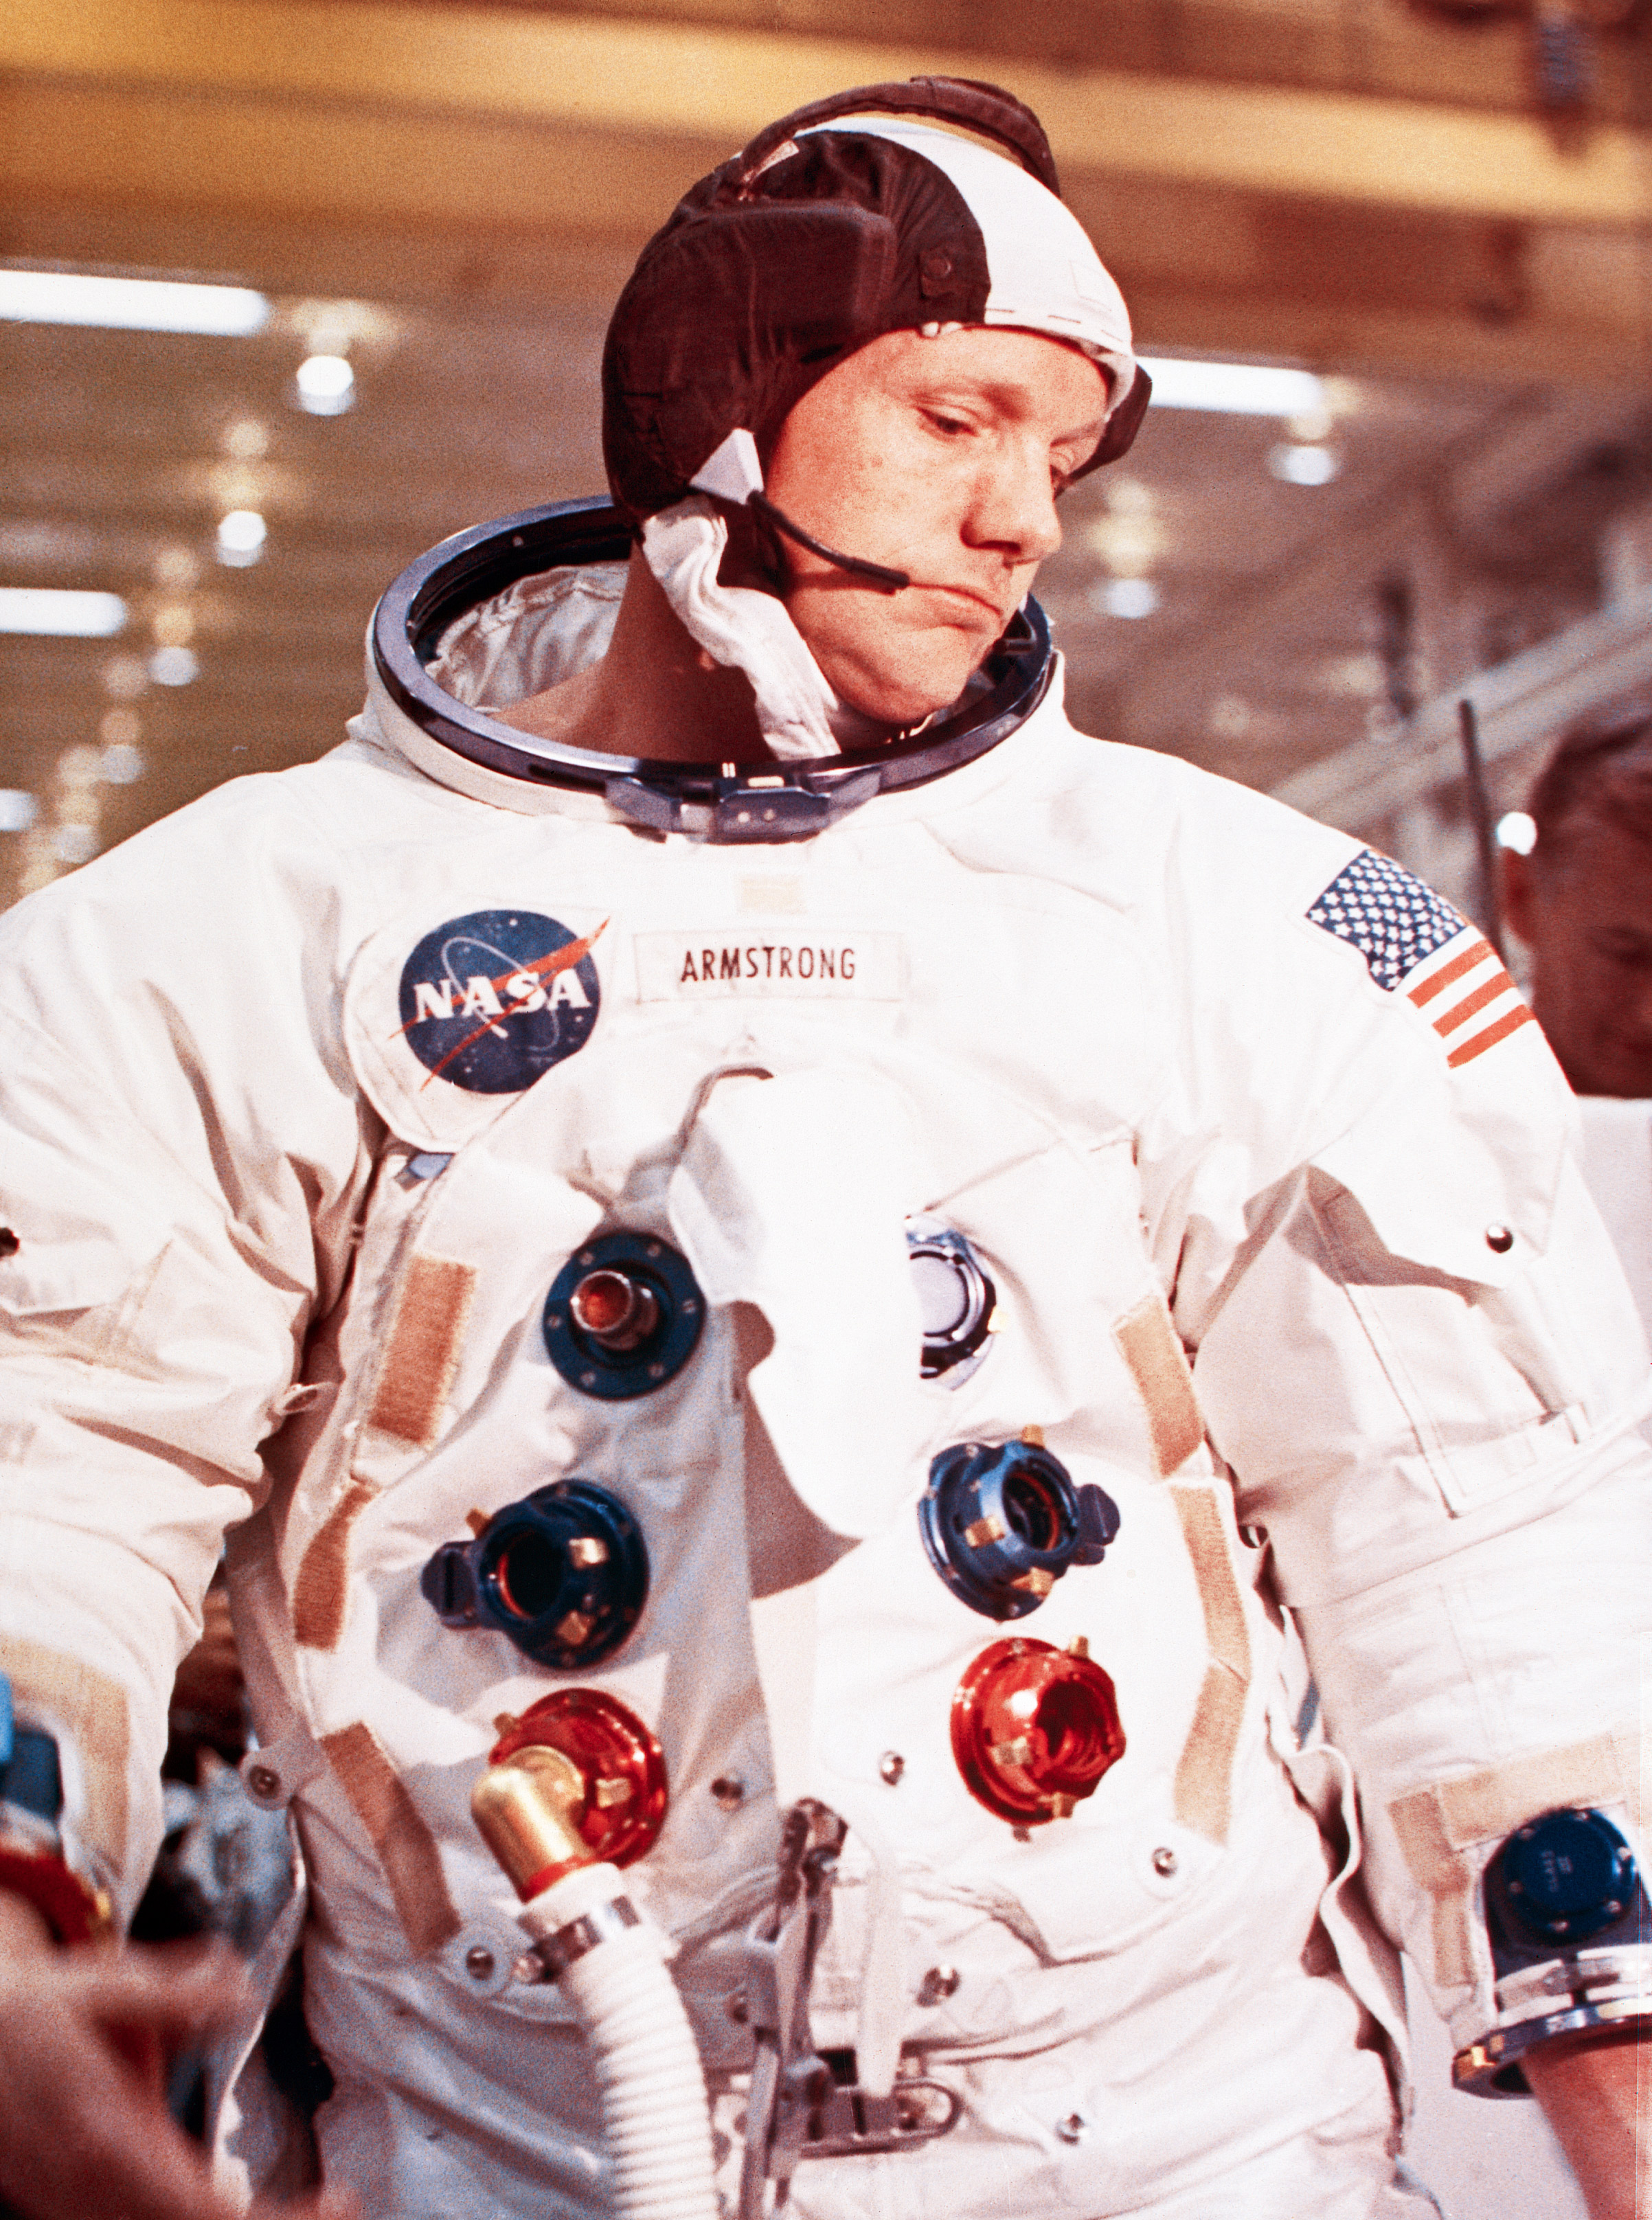 Apollo 11 mission commander Neil Armstrong puts on and checks out each element of his spacesuit before lift-off in July of 1969. (CORBIS/Corbis—Getty Images)